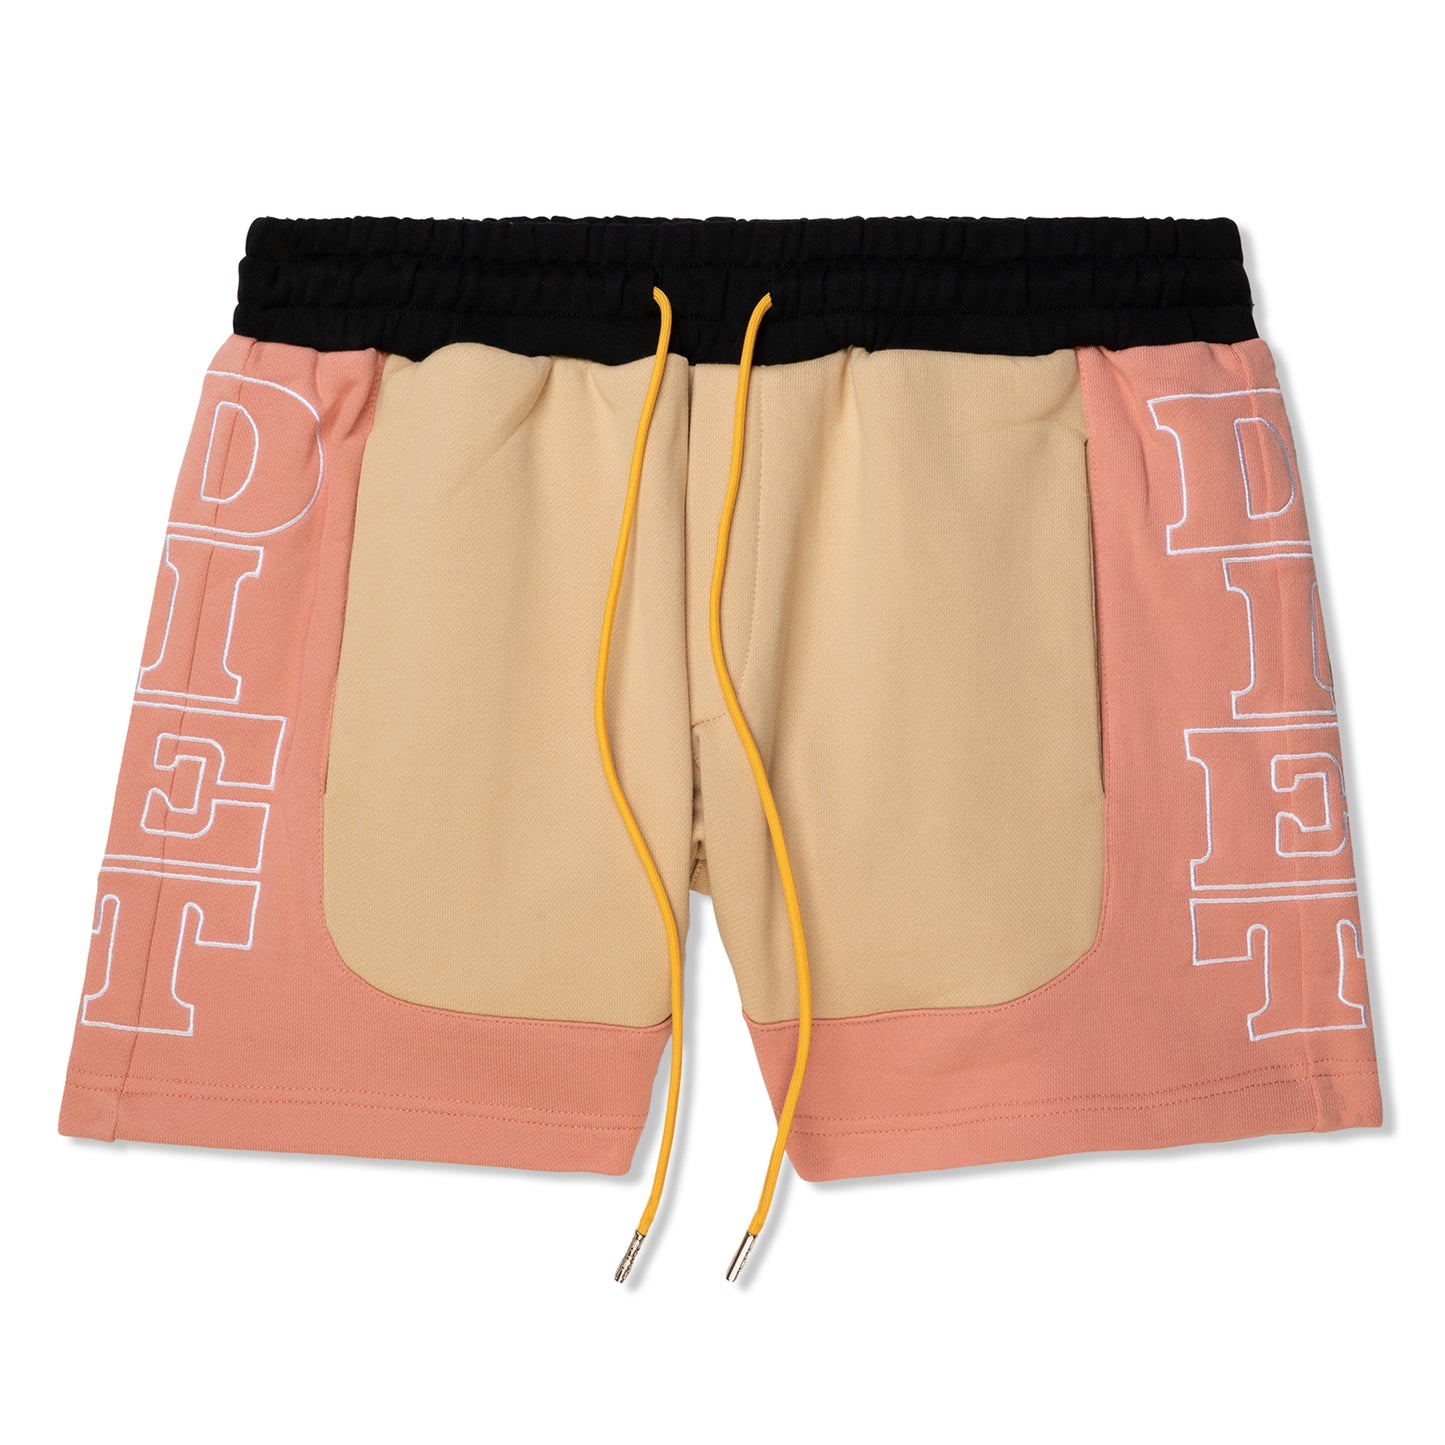 Diet Starts Monday French Terry Row Shorts (Tan/Pink)